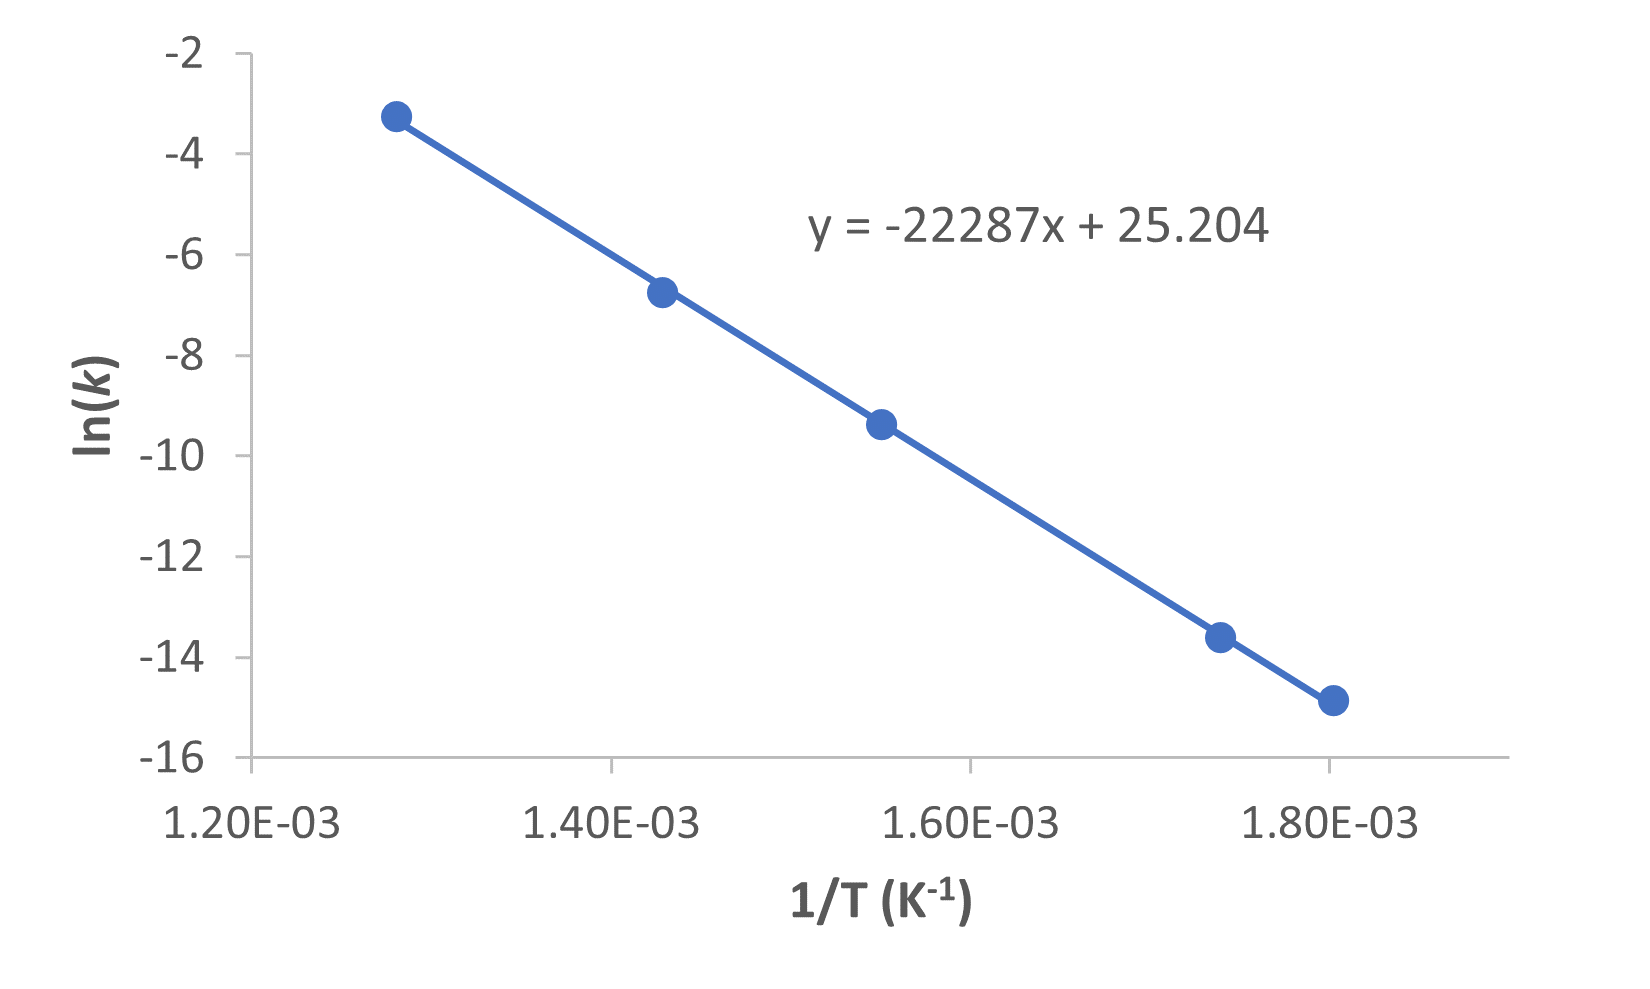 An Arrhenius plot of the data shown in Example 1. The linear fit yields an equation y = -22287x + 25.204